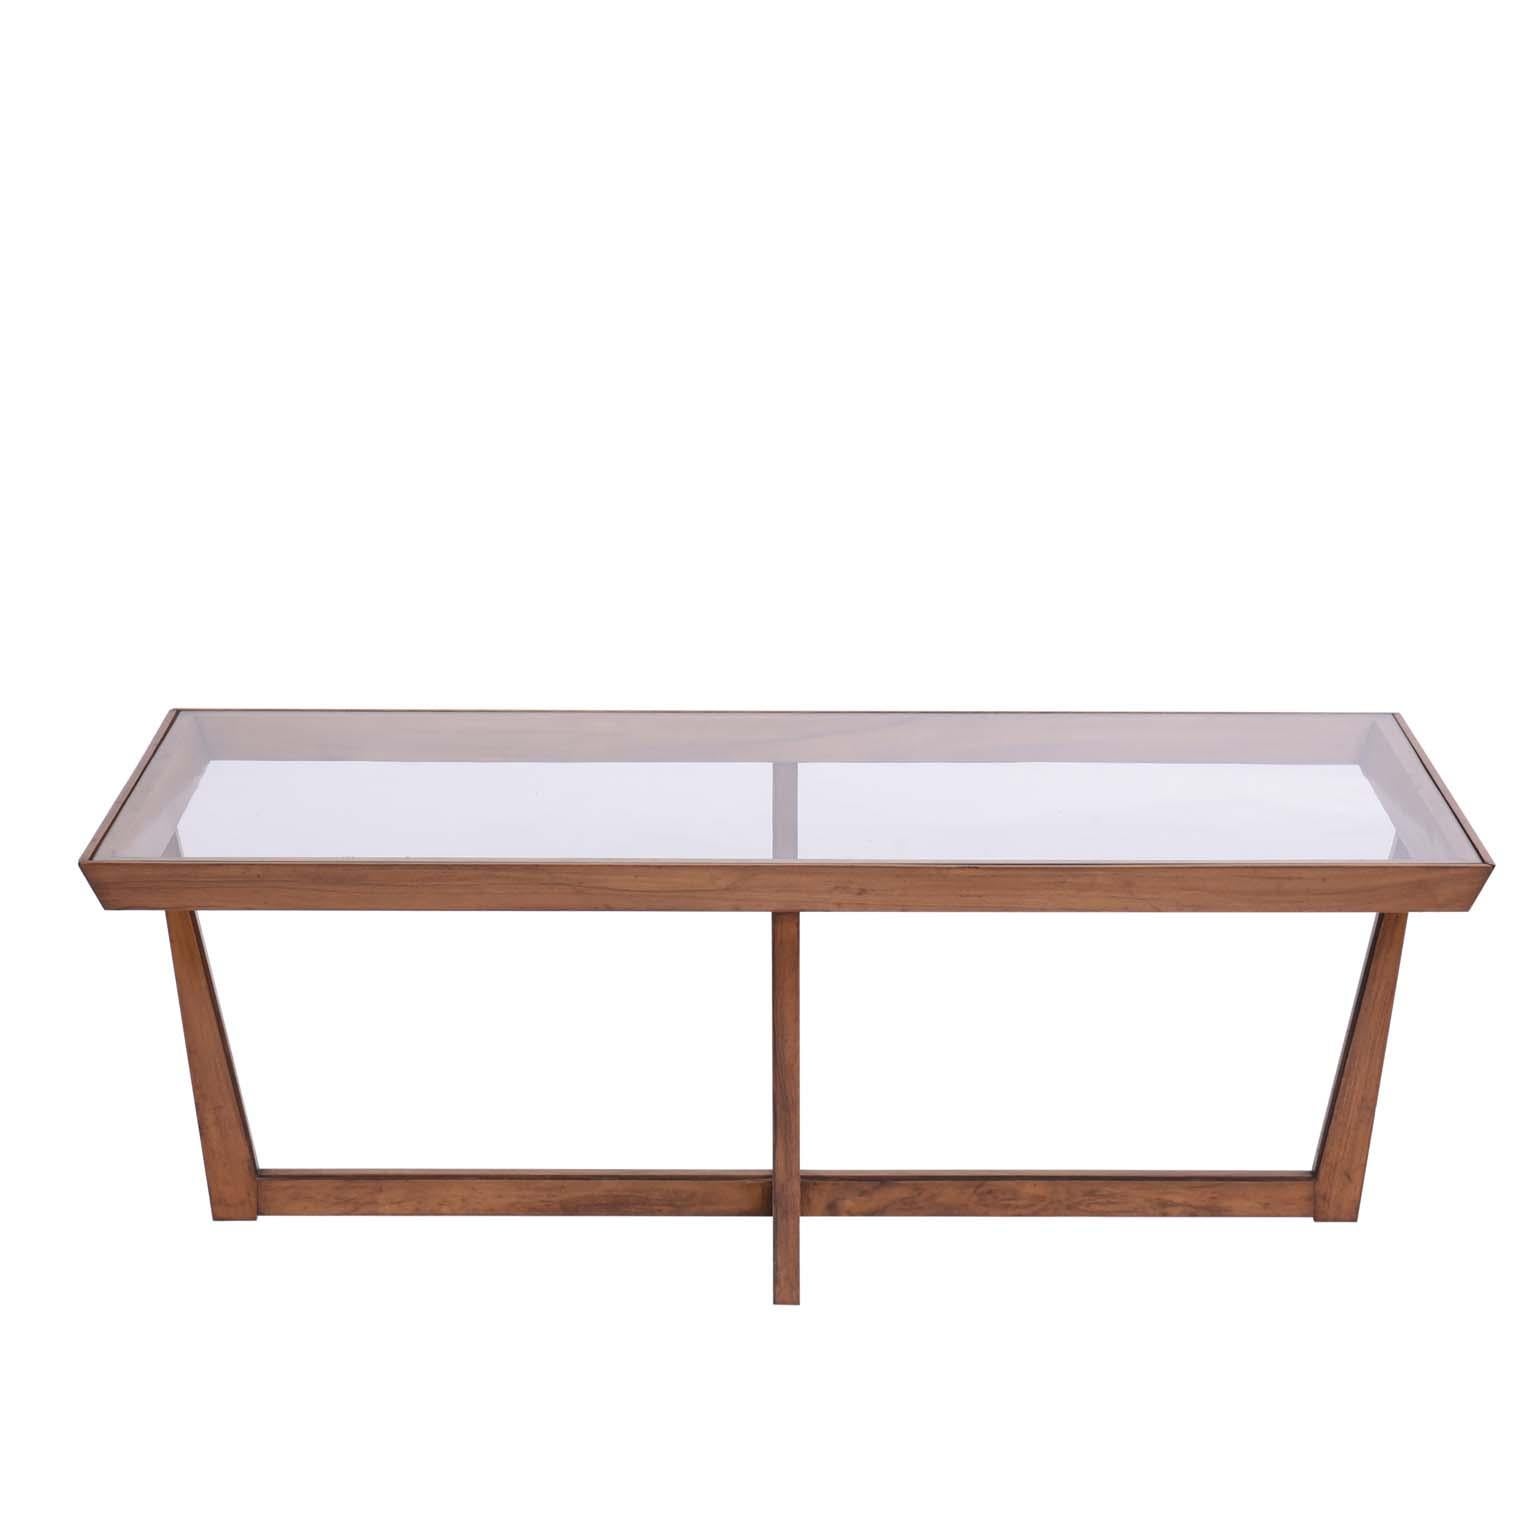 Midcentury Brazilian center table, 1960s

With a modernist design, this beautiful table with cleverly constructed wooden structure has a glass top over the whole structure, which gives the impression of transparency.